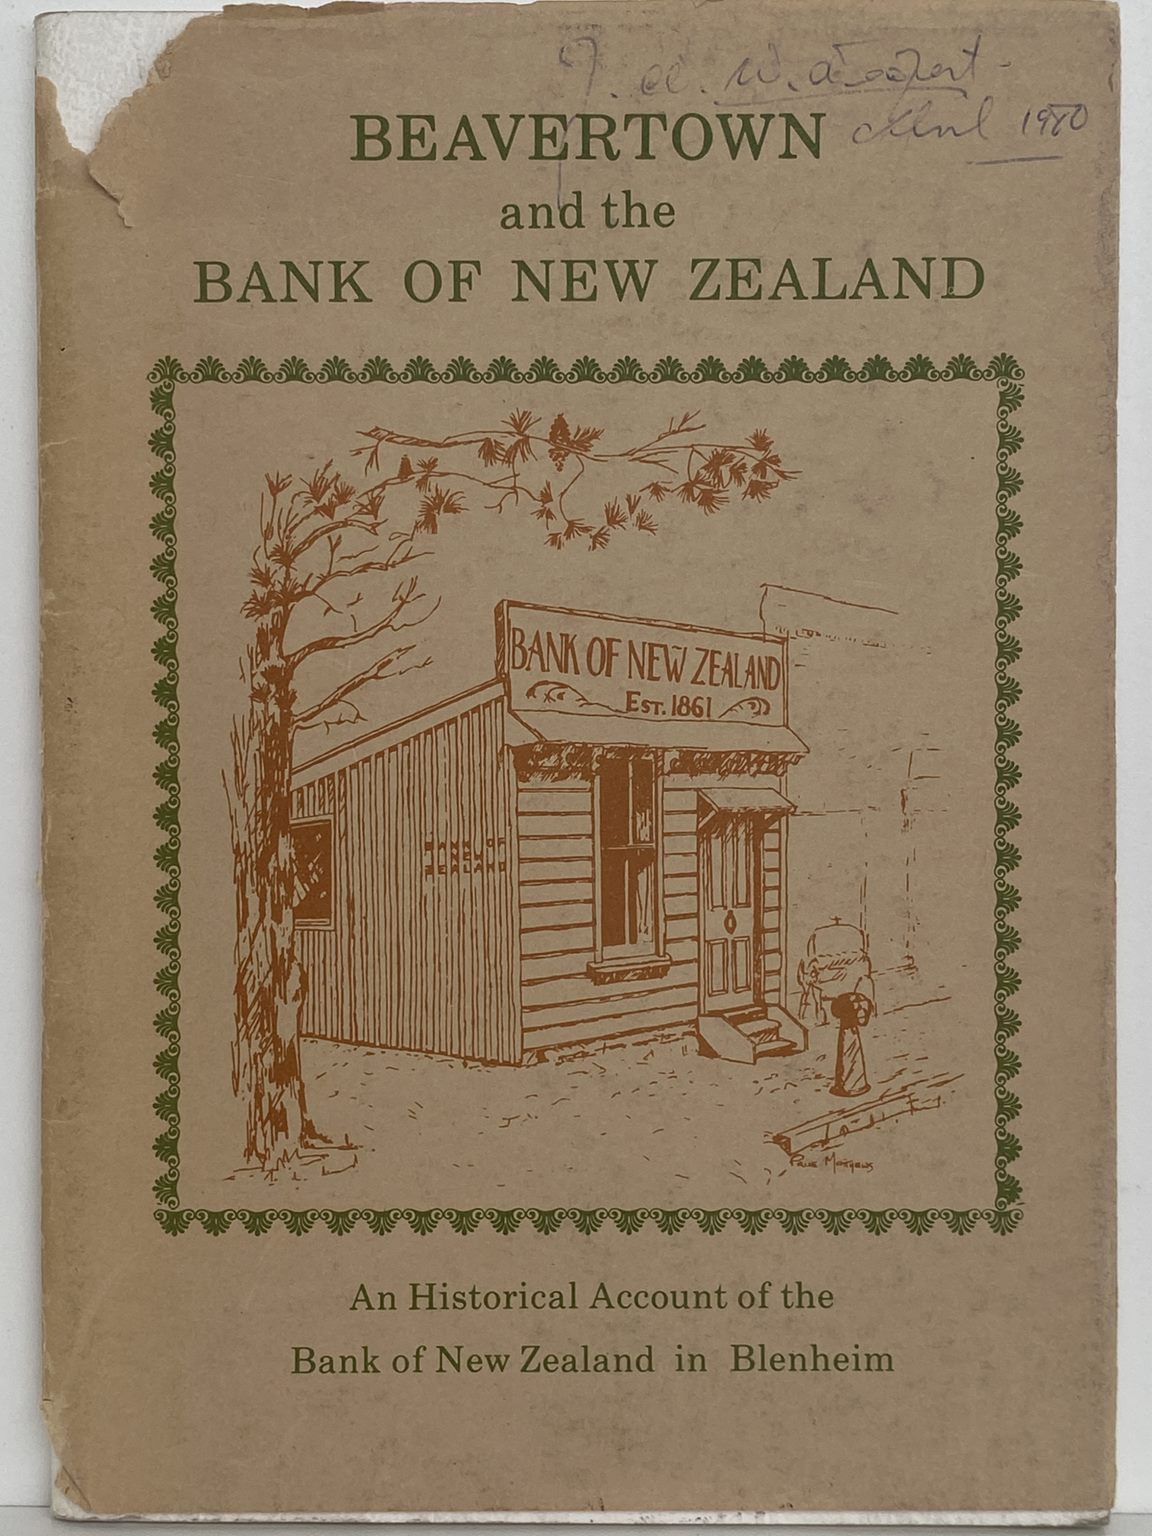 BEAVERTOWN and the BANK OF NEW ZEALAND: Historical Account